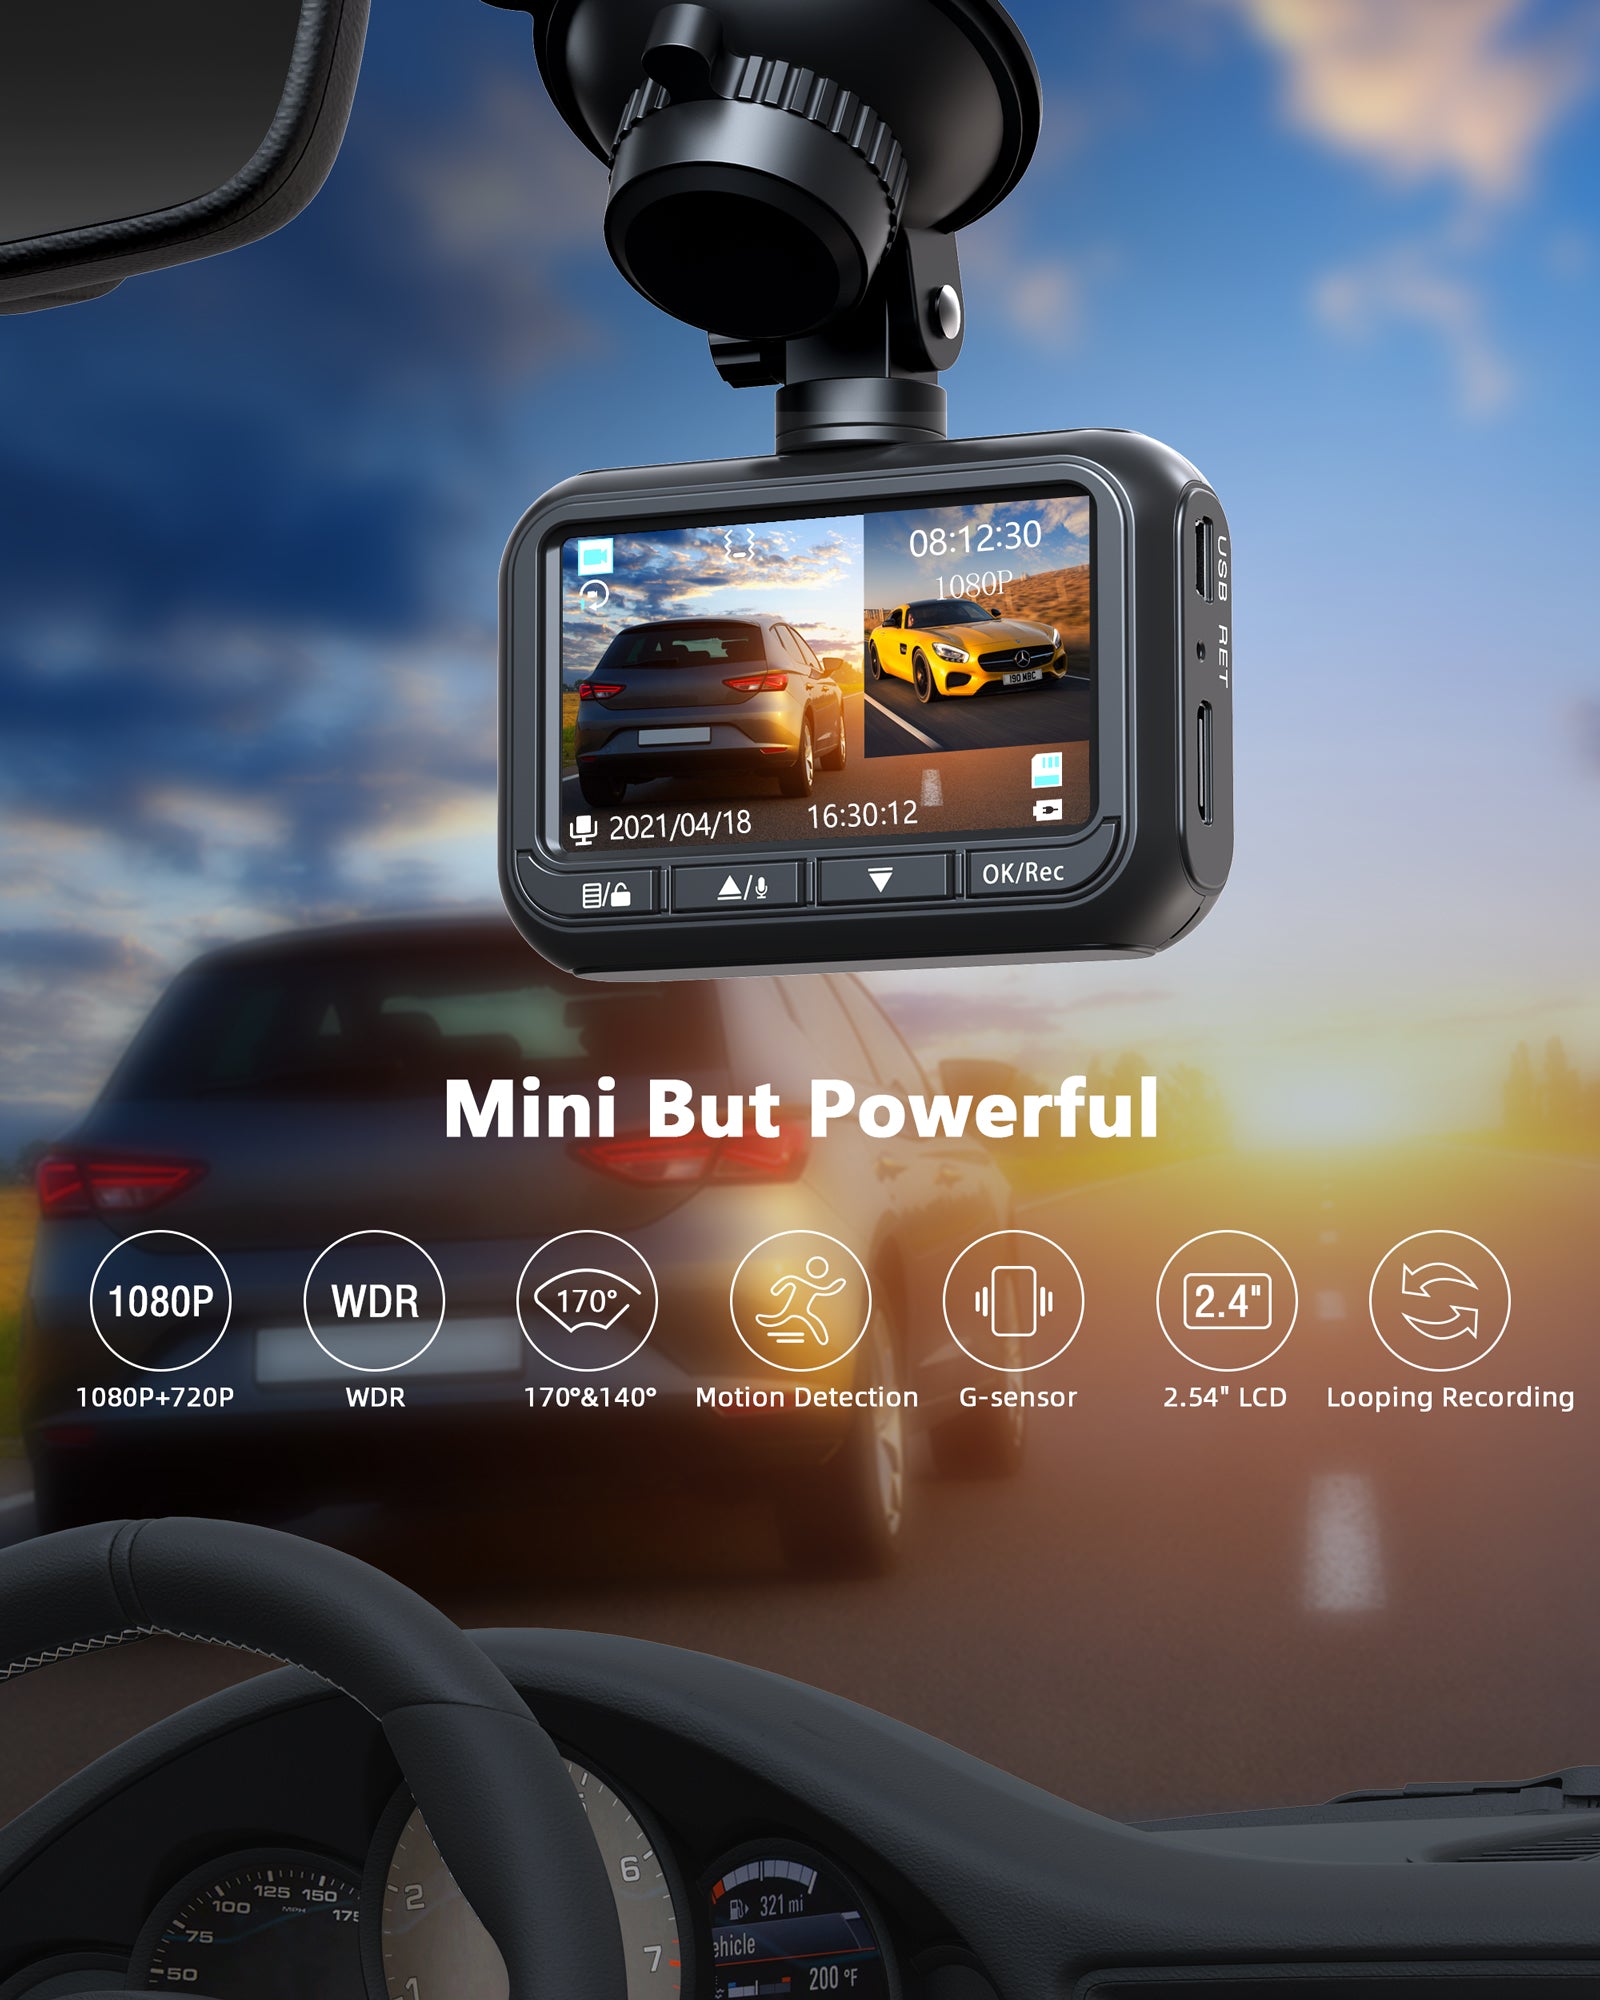 Toguard CE18A/DC07 Mini Dual Dash Cam for Cars 1080P Front and Rear Dash Camera